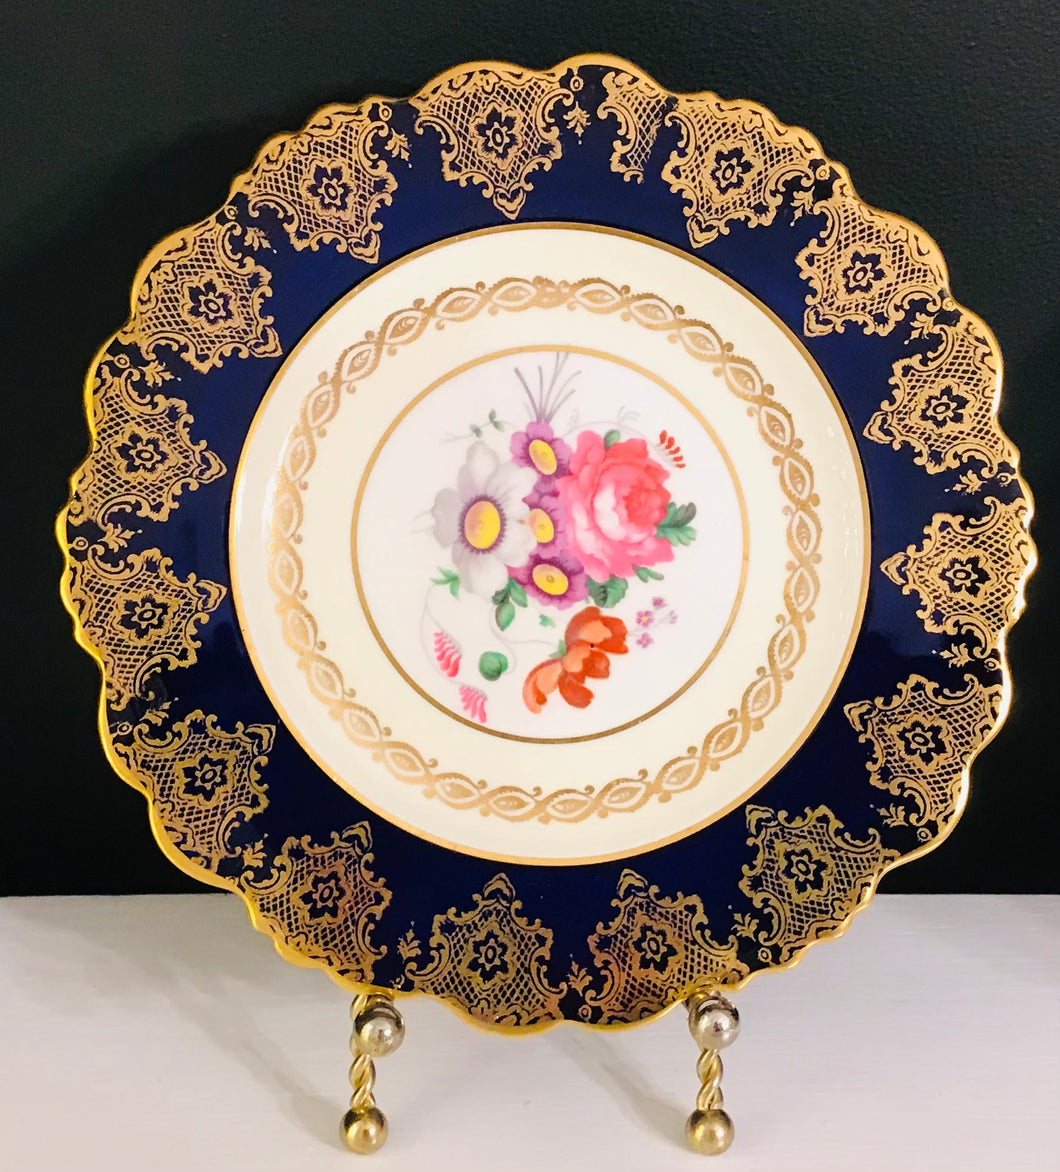 Pretty in Pink-Stunning Paragon Royal Warrant 8.5 Inch Cobalt Blue Floral Plate